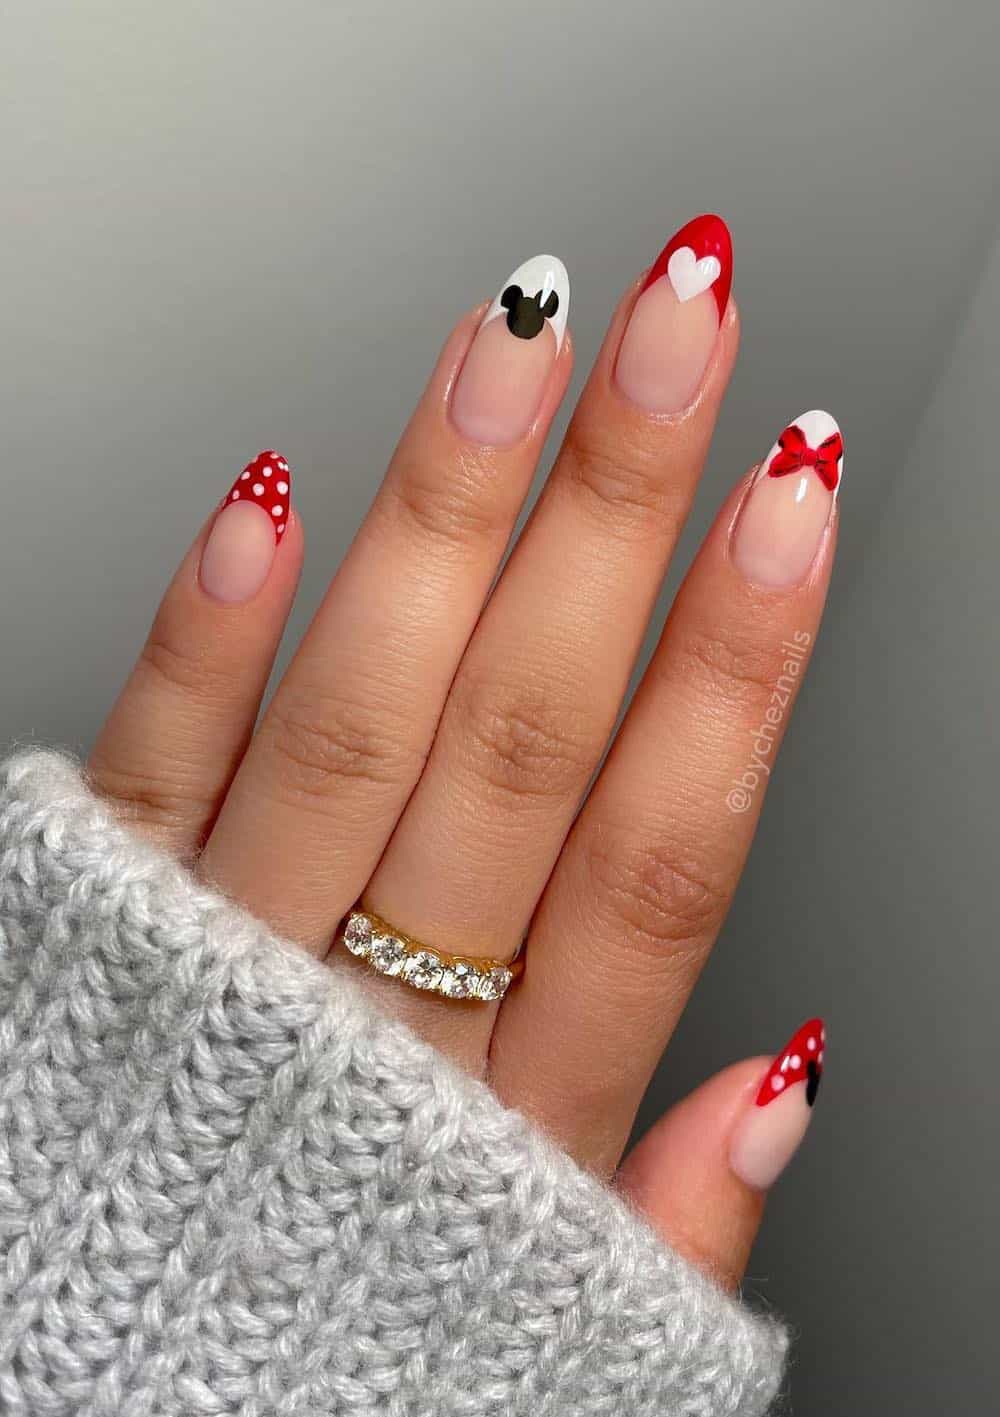 Medium almond nails with a Mickey Mouse design featuring nude polish, white and red tips, and simple accents